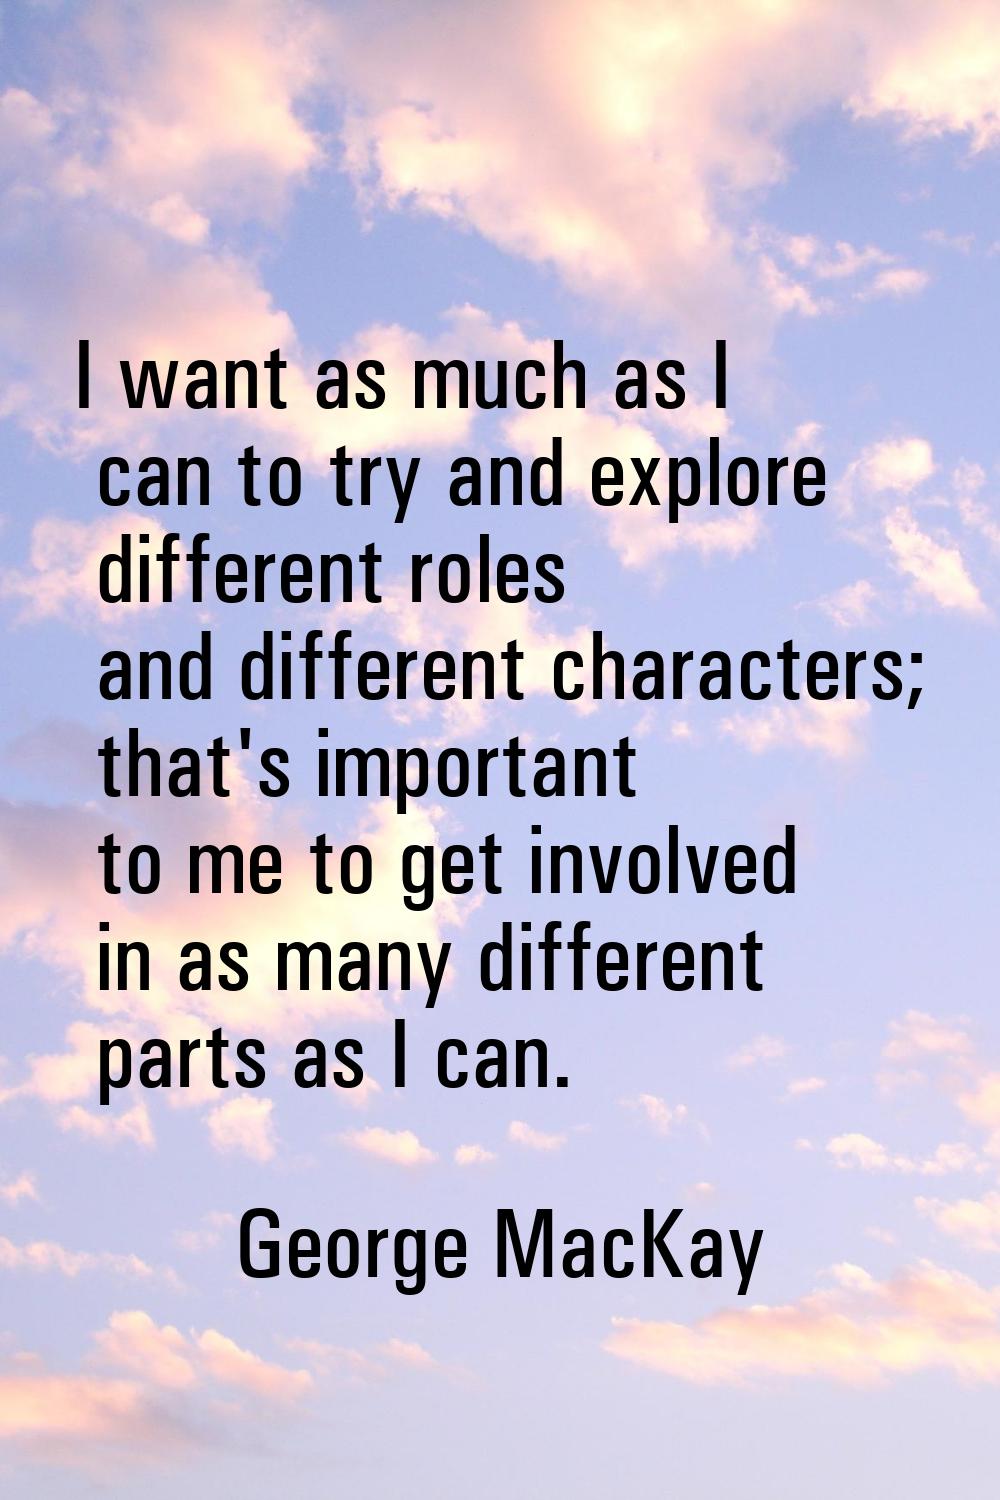 I want as much as I can to try and explore different roles and different characters; that's importa